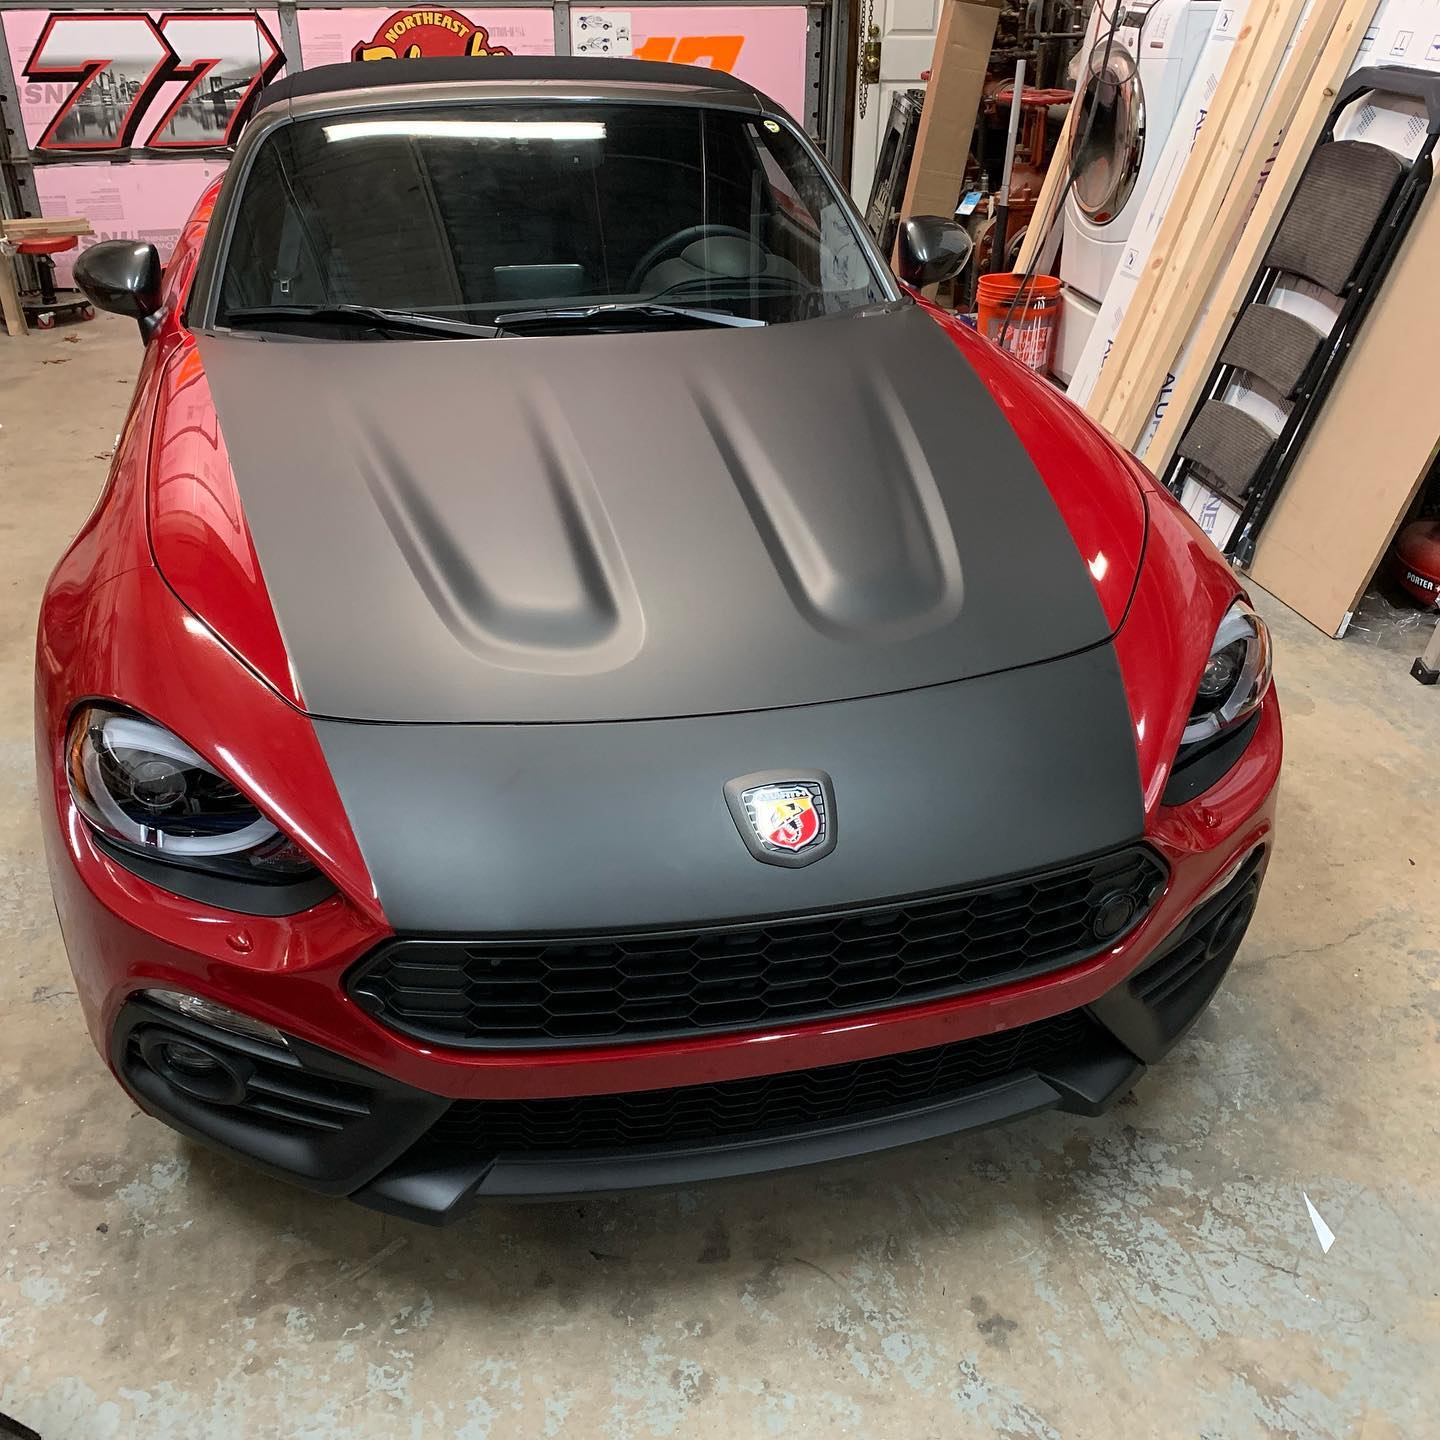 The Color Change # Red Car Wrap